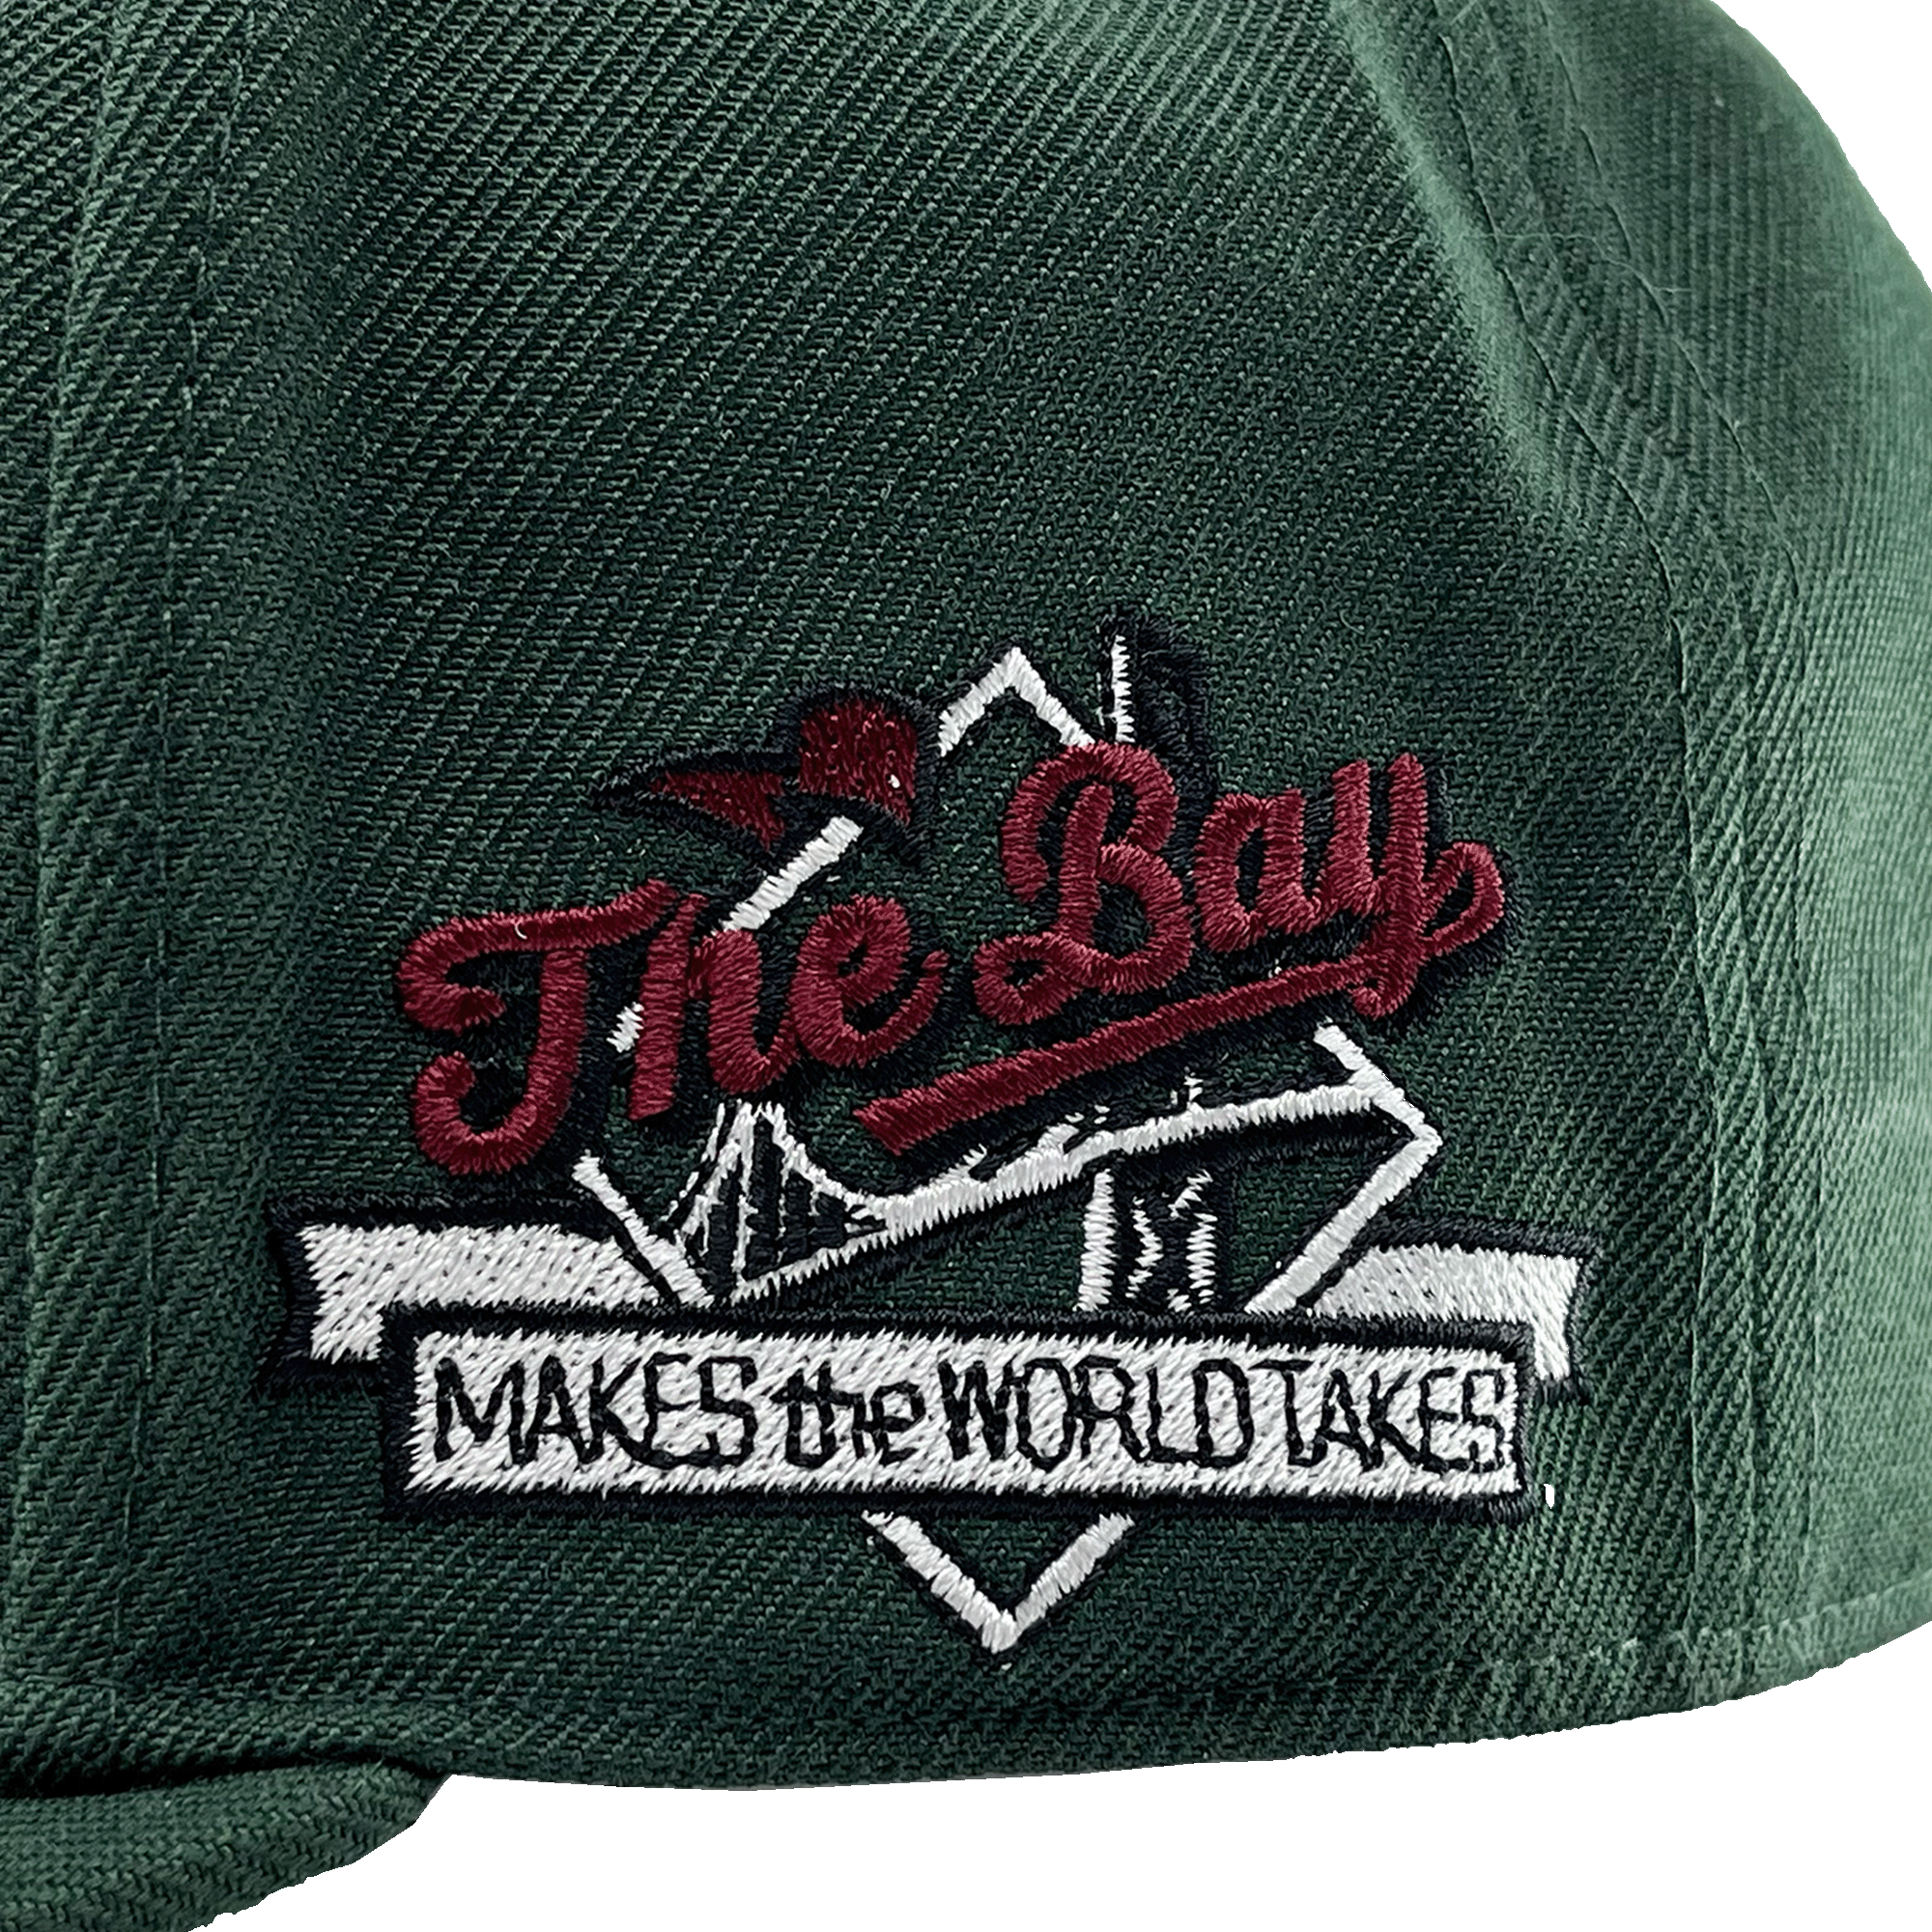 Detailed close-up of The Bay Makes, The World Takes detail on the wearer's left side of a green hat.